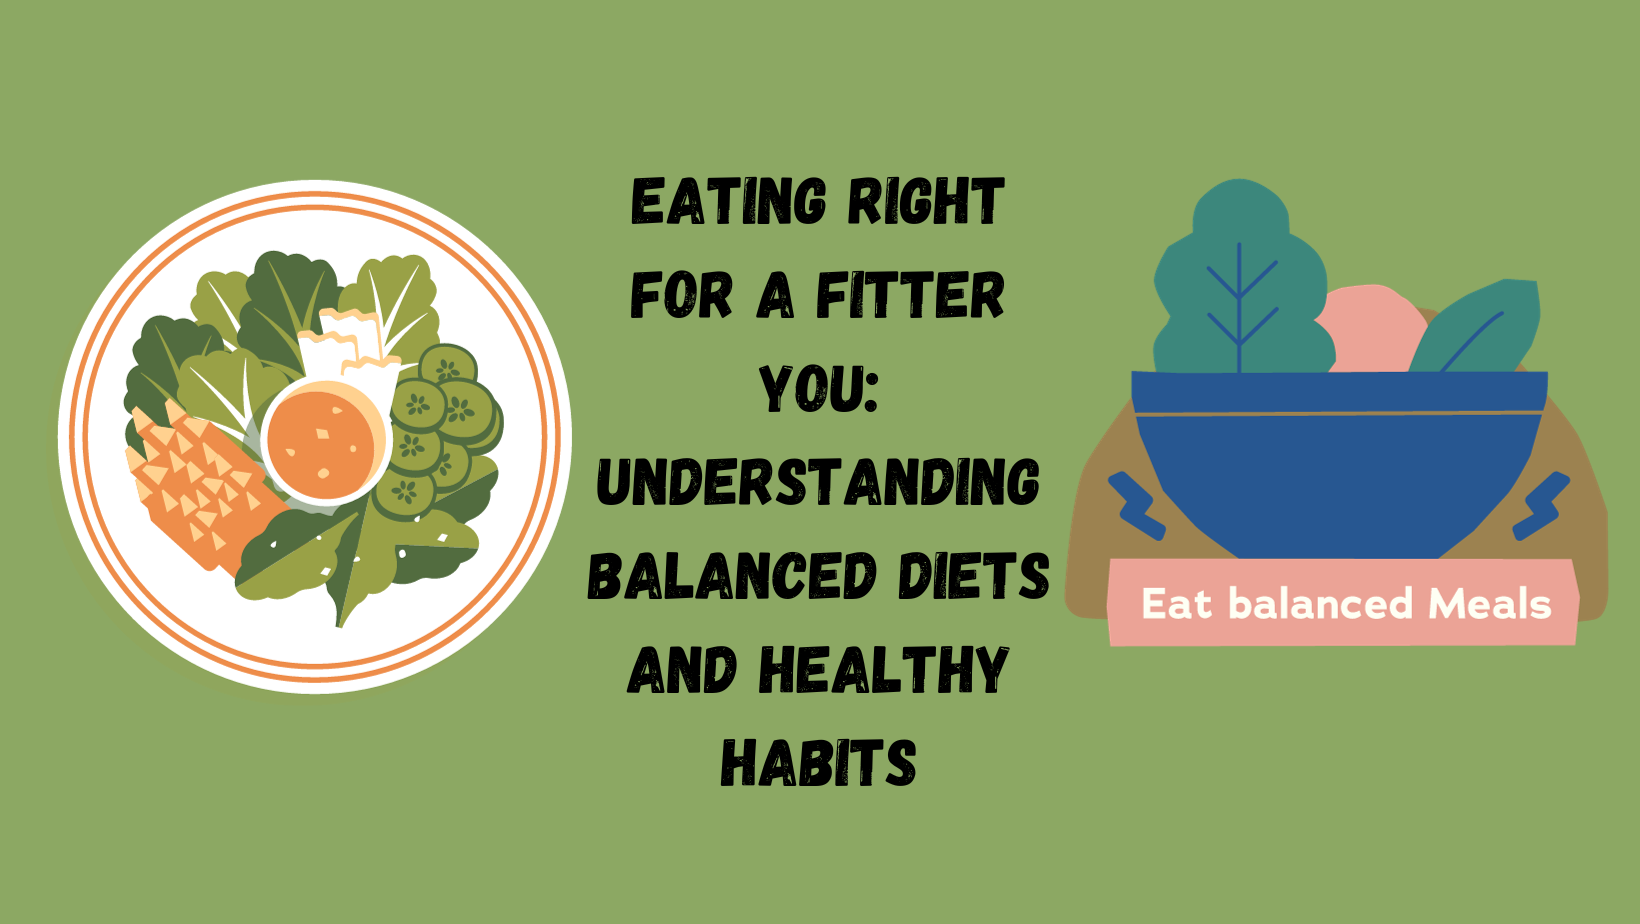 Eating Right for a Fitter You: Understanding Balanced Diets and Healthy Habits